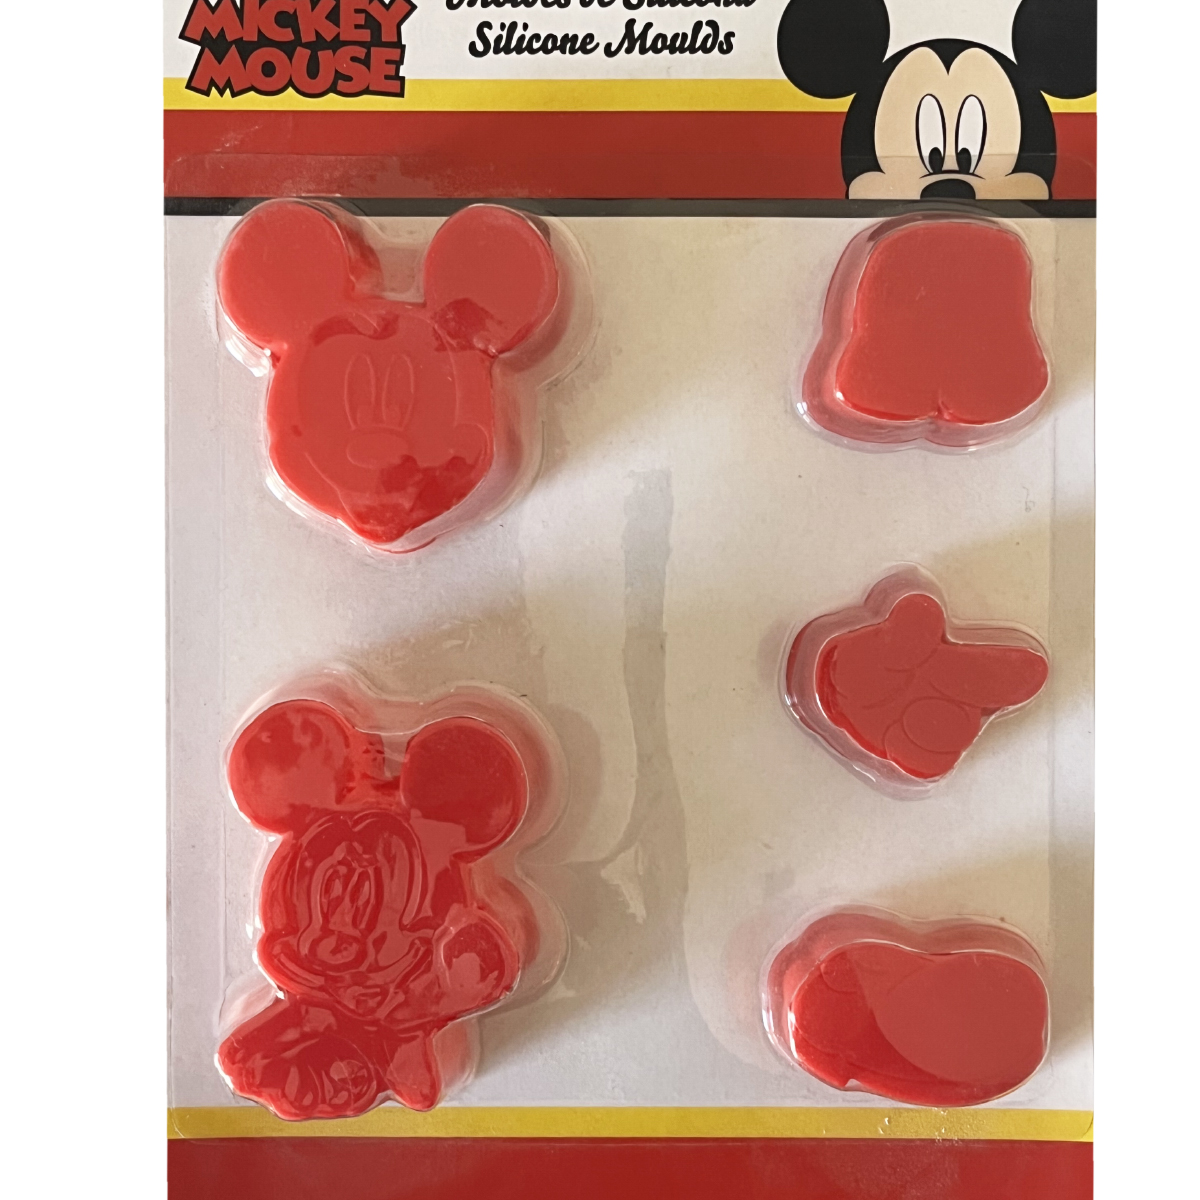 5 Petits moules souples Mickey MODELE ROUGE